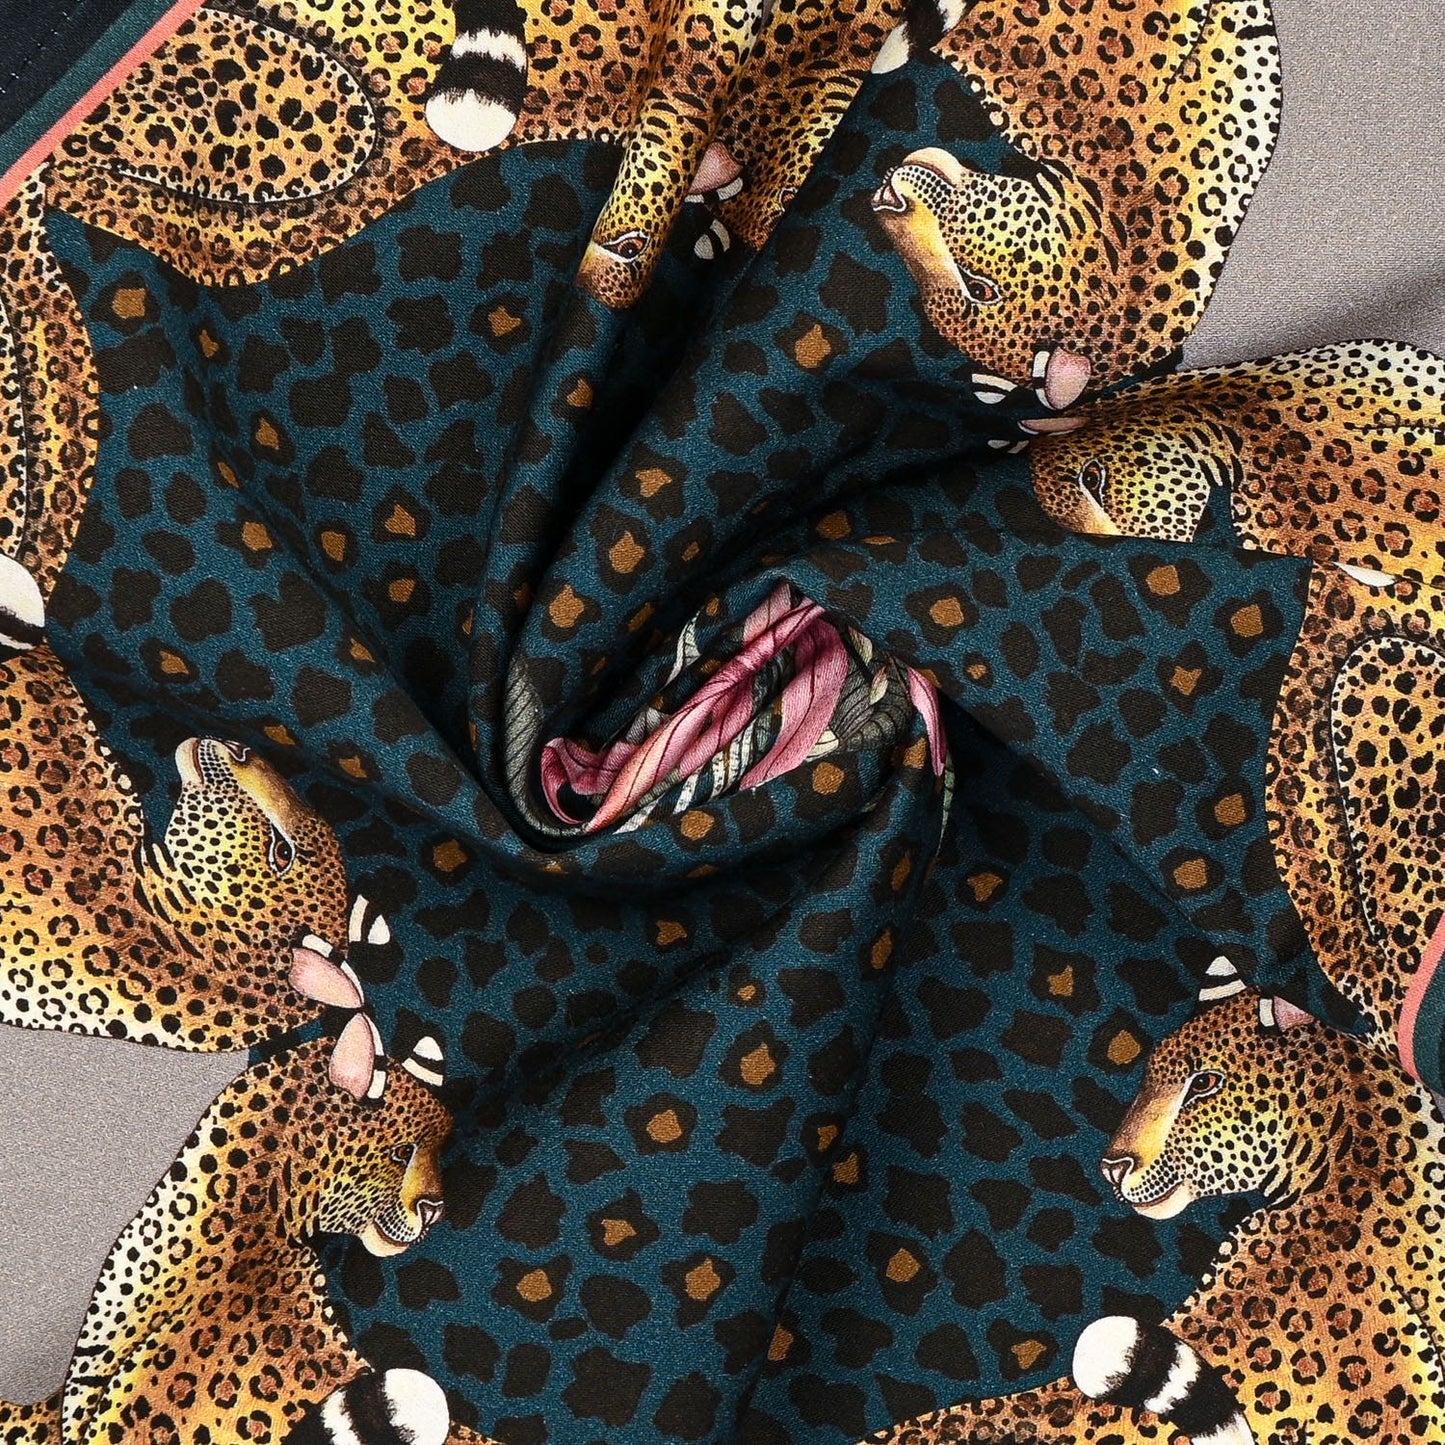 Leopard Lily Napkins in Starry Night